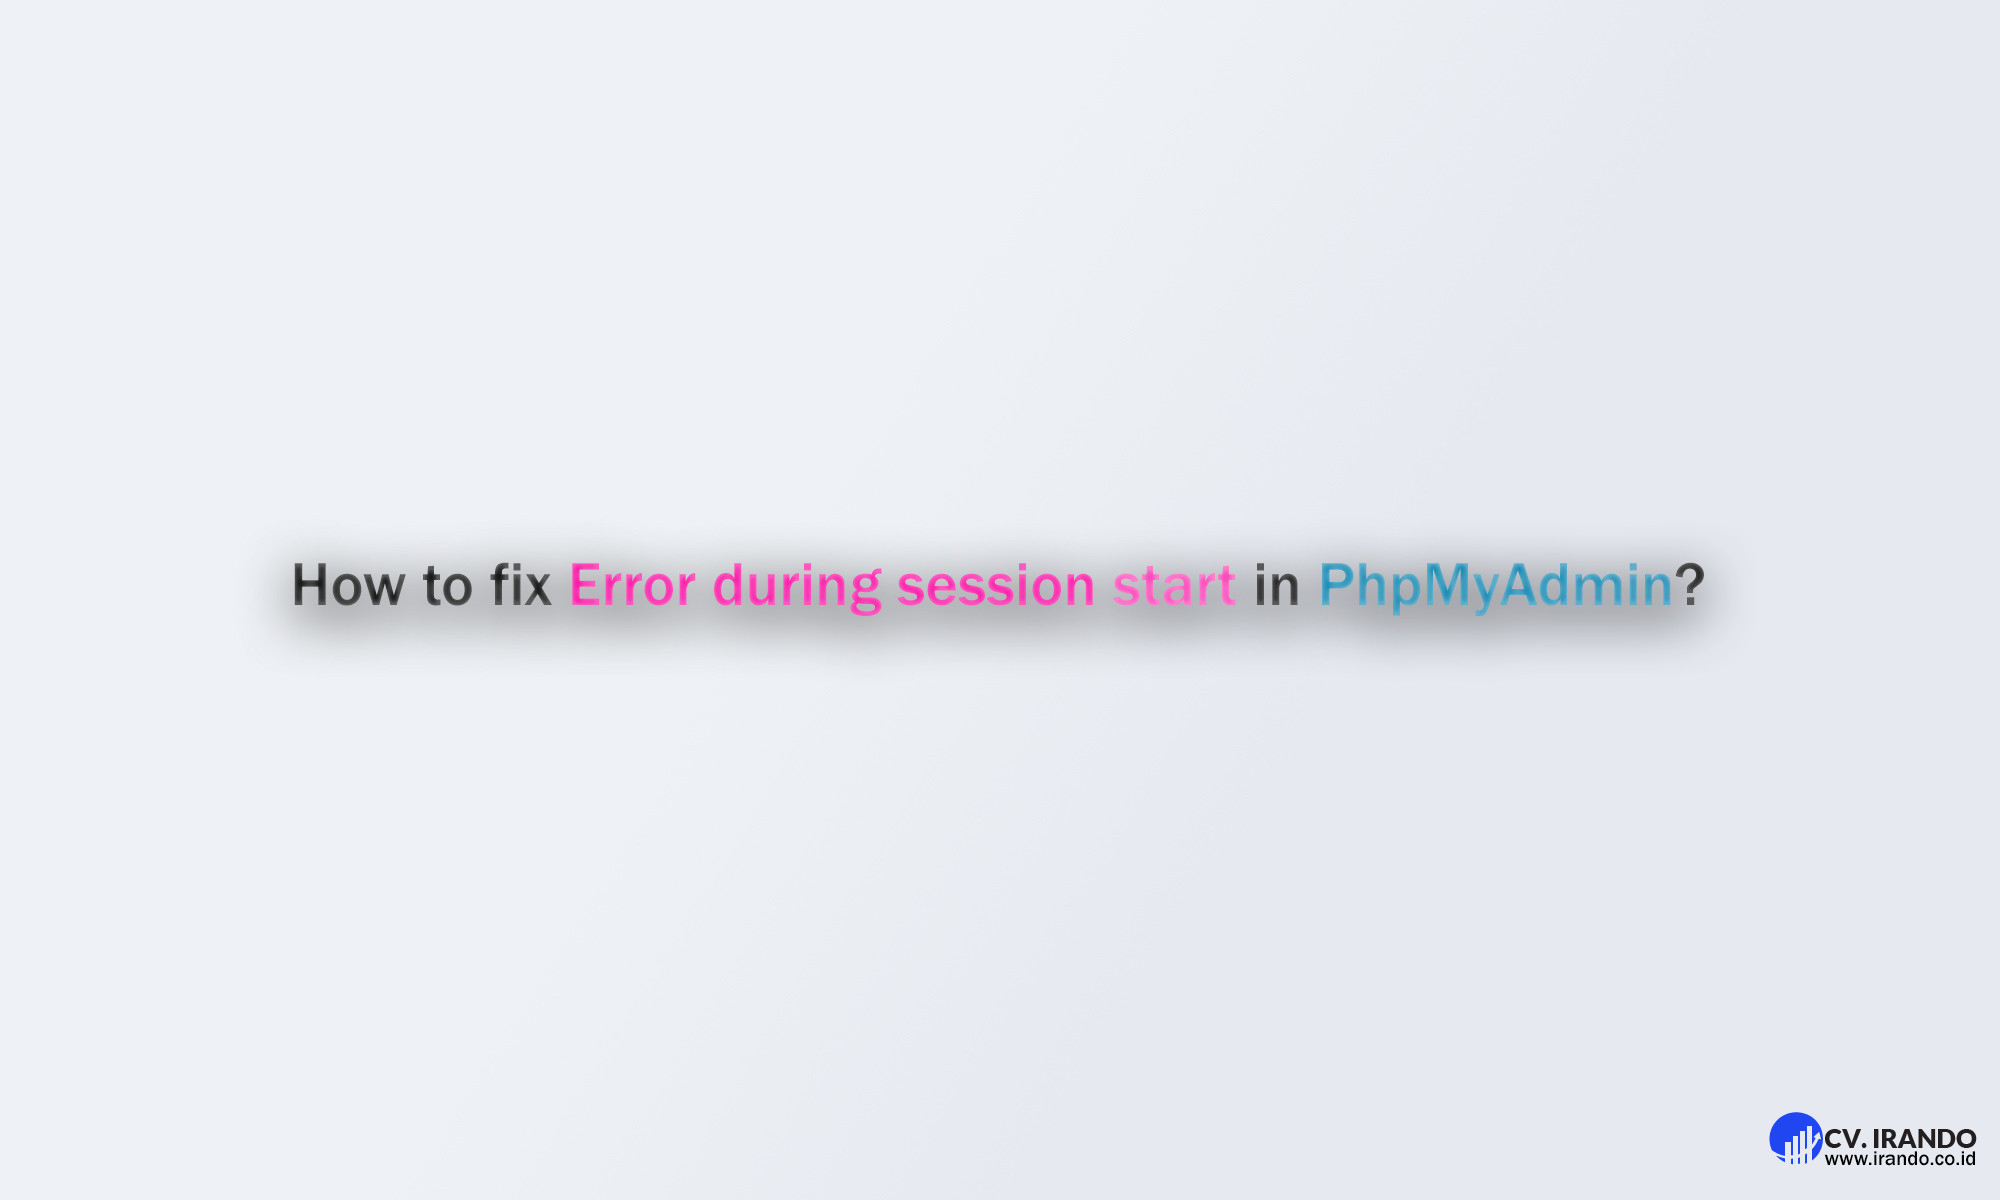 How to fix Error during session start in PhpMyAdmin